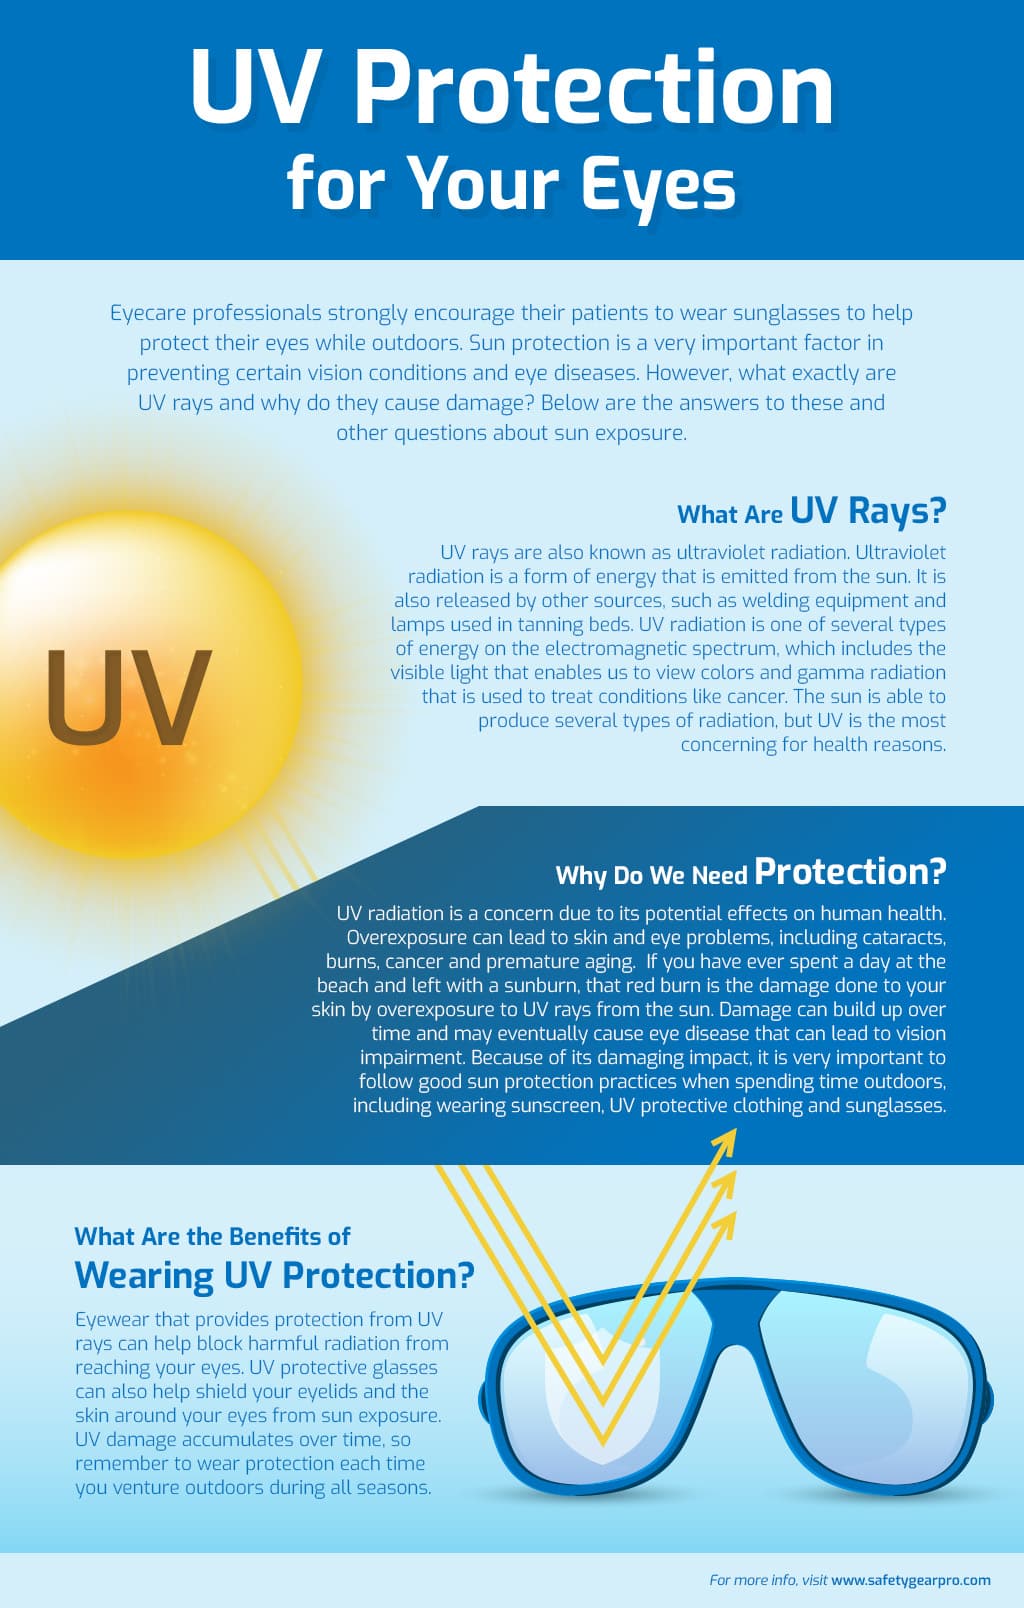 UV Protection For Your Eyes